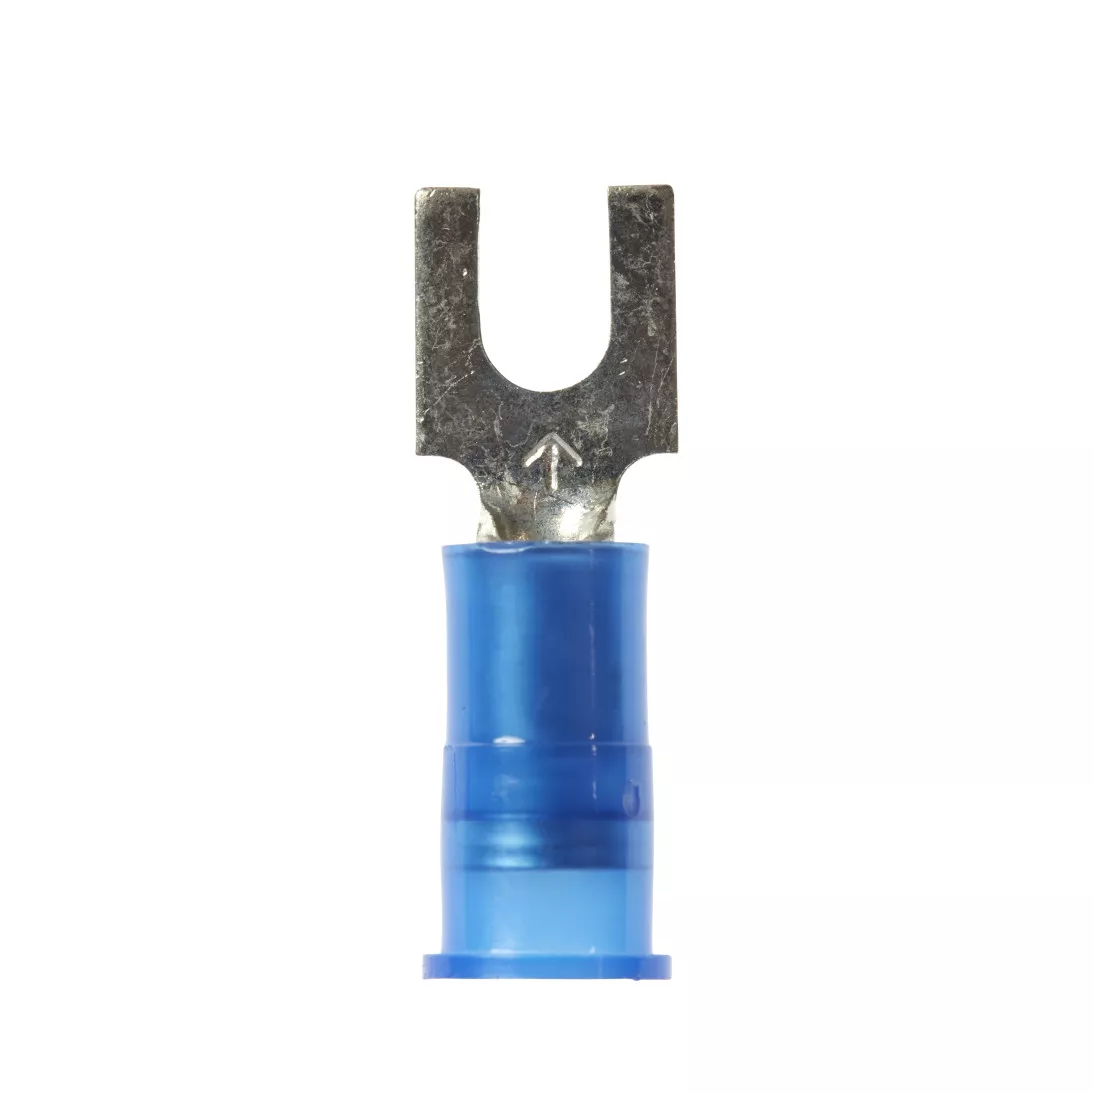 3M™ Scotchlok™ Block Fork Nylon Insulated, 100/bottle, MNG14-6FB/SX,
suitable for use in a terminal block, 500/Case